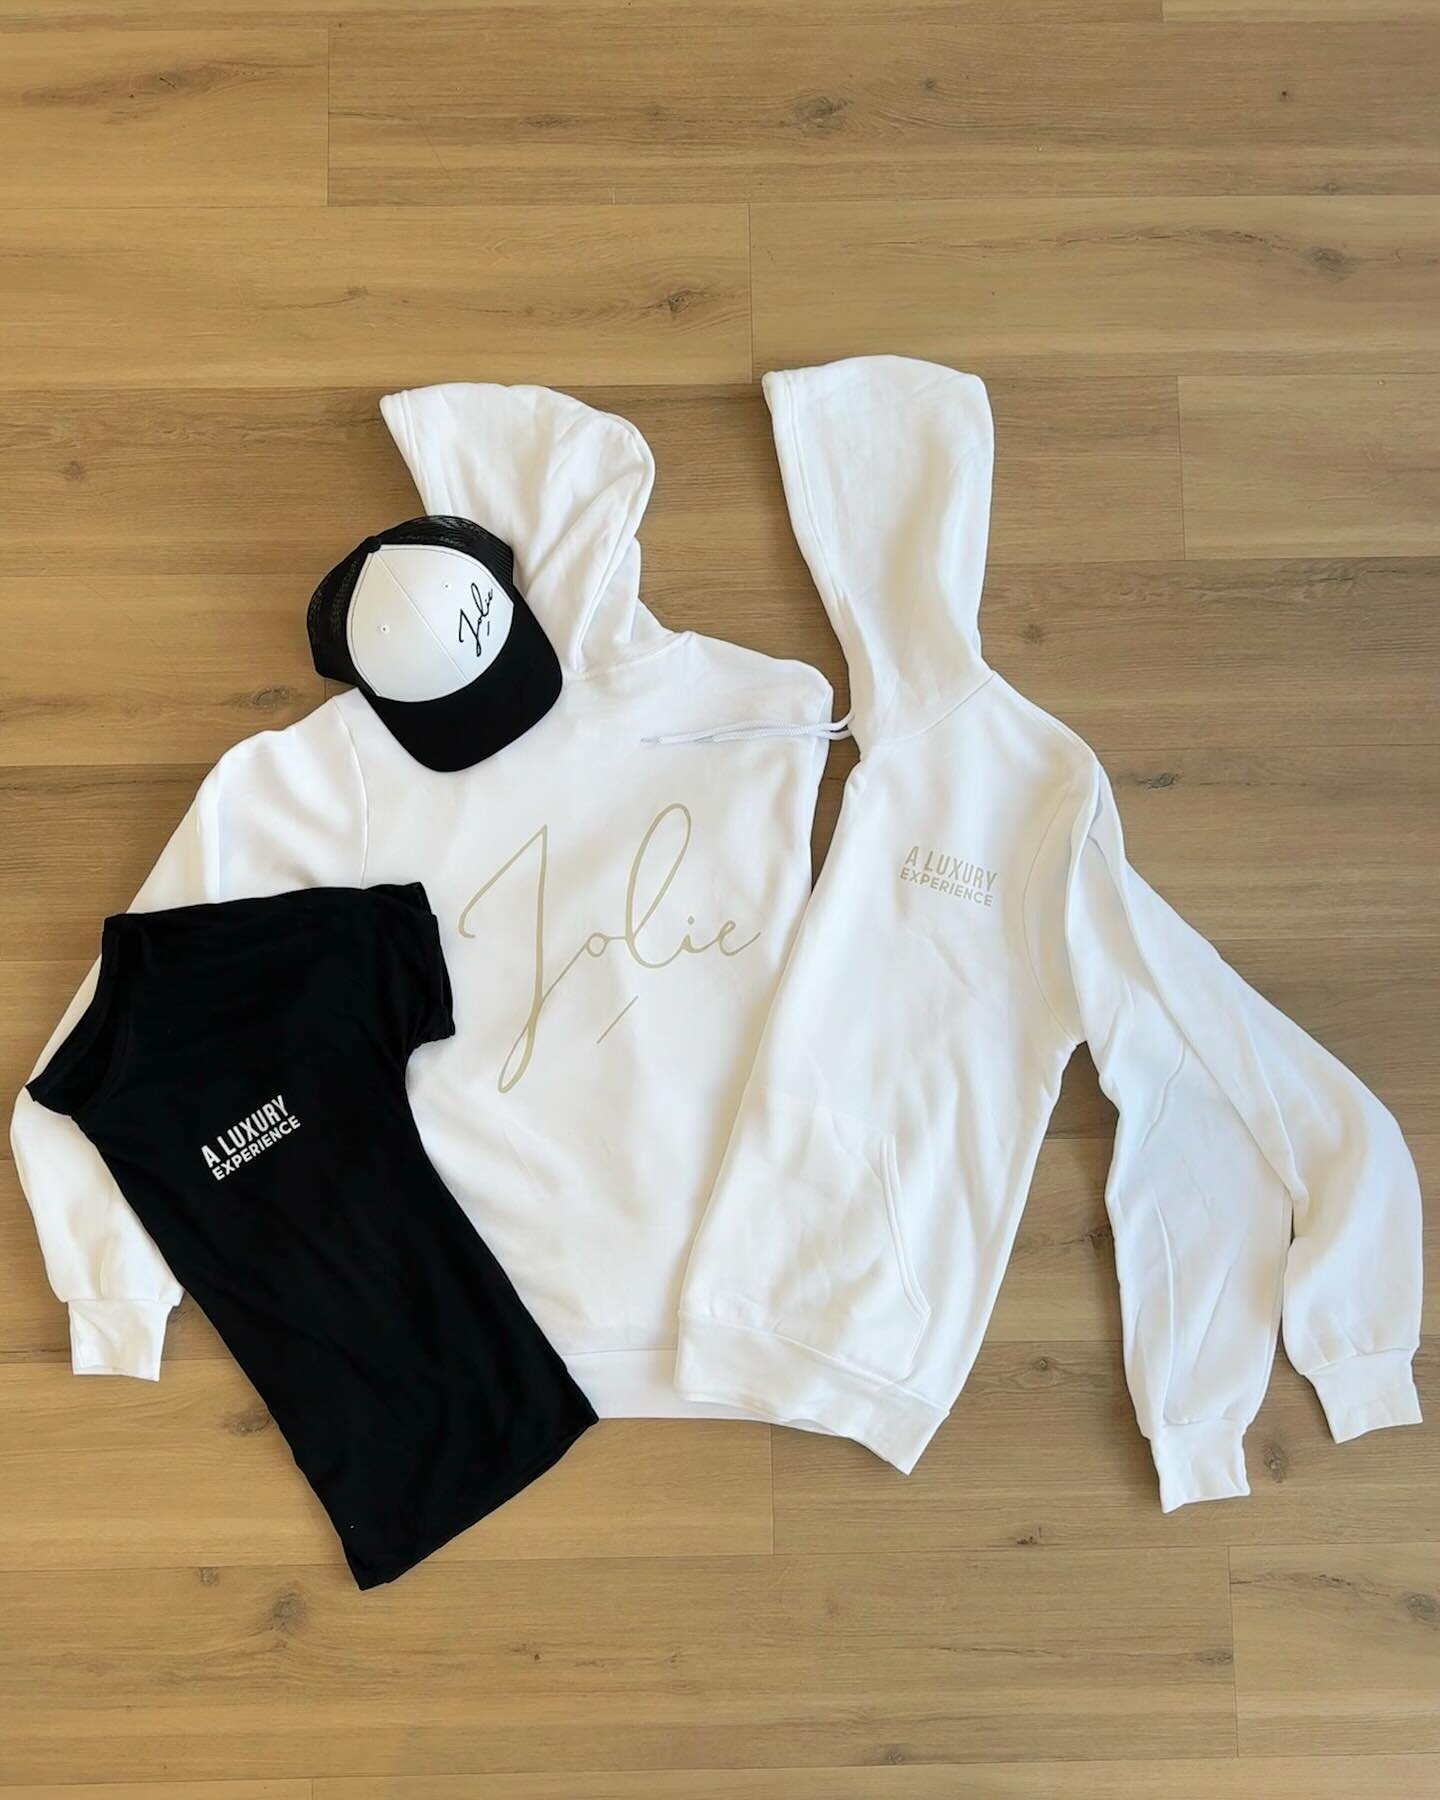 🌟NEW JOLIE MERCH ALERT🌟

Stop into the spa to pick up your new spring attire!

🌟Black slouchy &ldquo;Luxury Experience&rdquo; short sleeve shirt
&bull; sizes: small, medium, large, extra large

🌟White &ldquo;Luxury Experience&rdquo; sweatshirt
&b